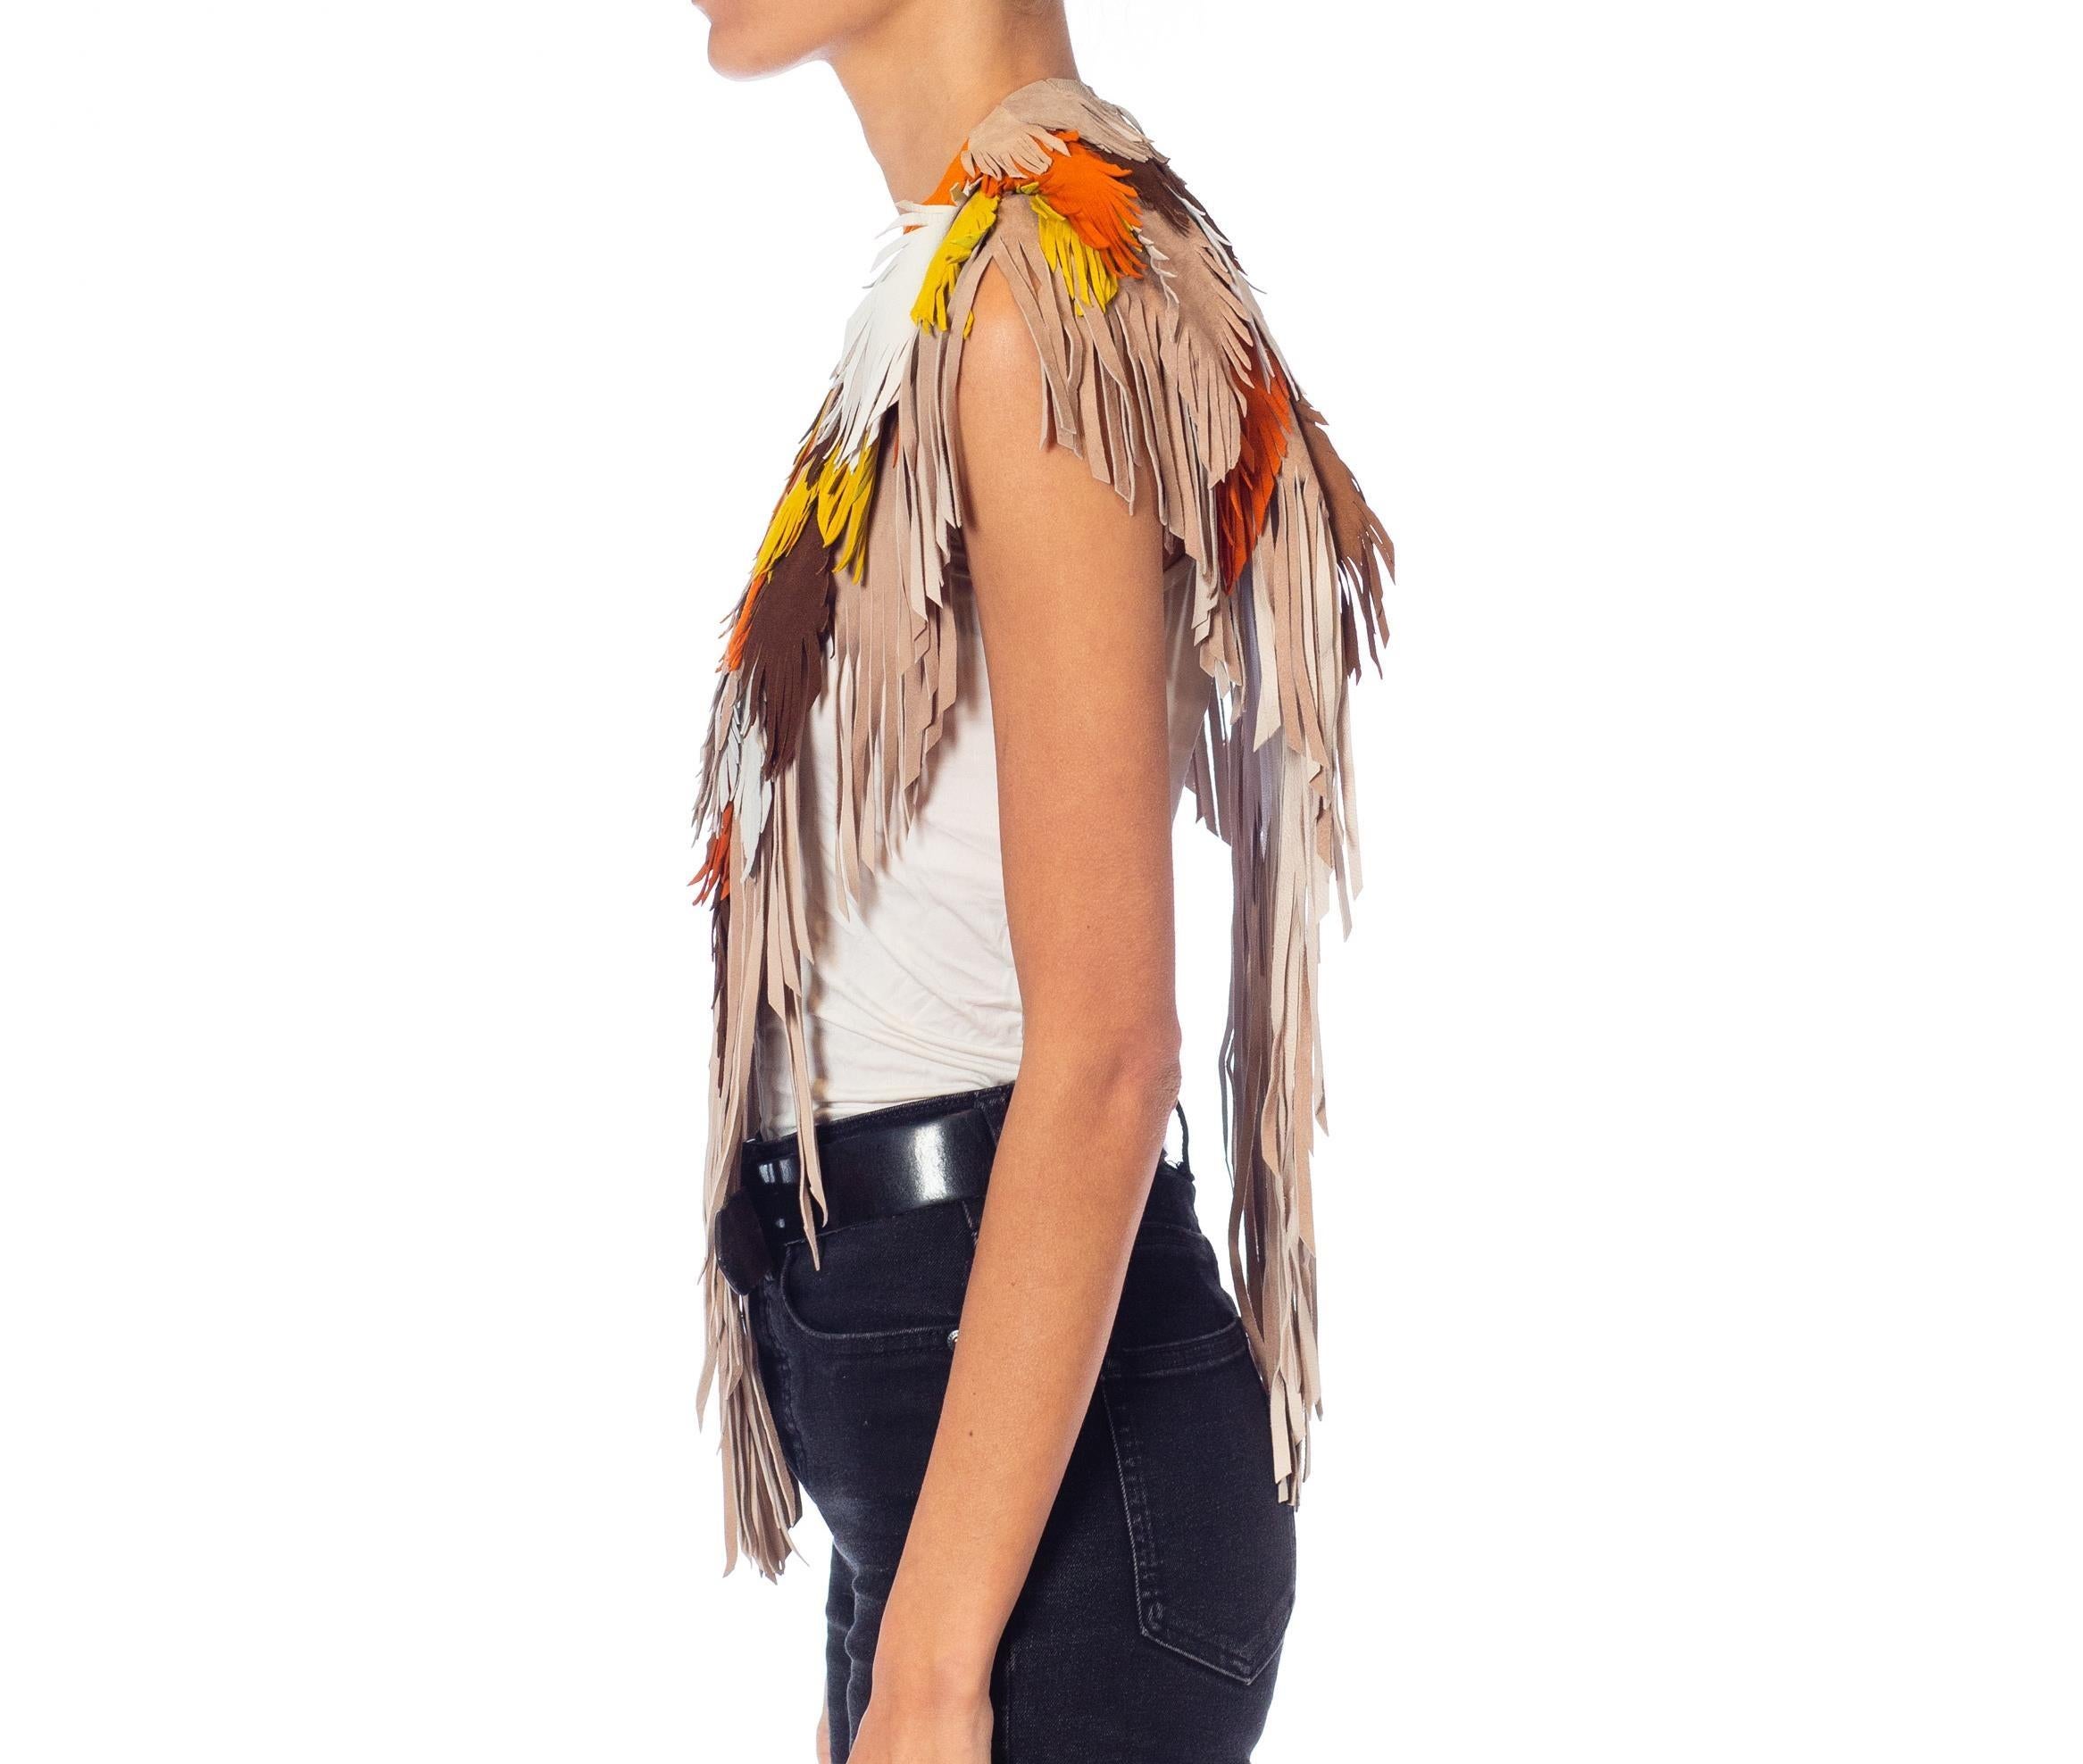 Each Feather-Leather is made by hand by our friends in Columbia in their co-op owned and operated facilities.  Morphew Collection Phoenix Sunset Suede Fringe Feather Leather Cape 
MORPHEW COLLECTION is made entirely by hand in our NYC Ateliér of